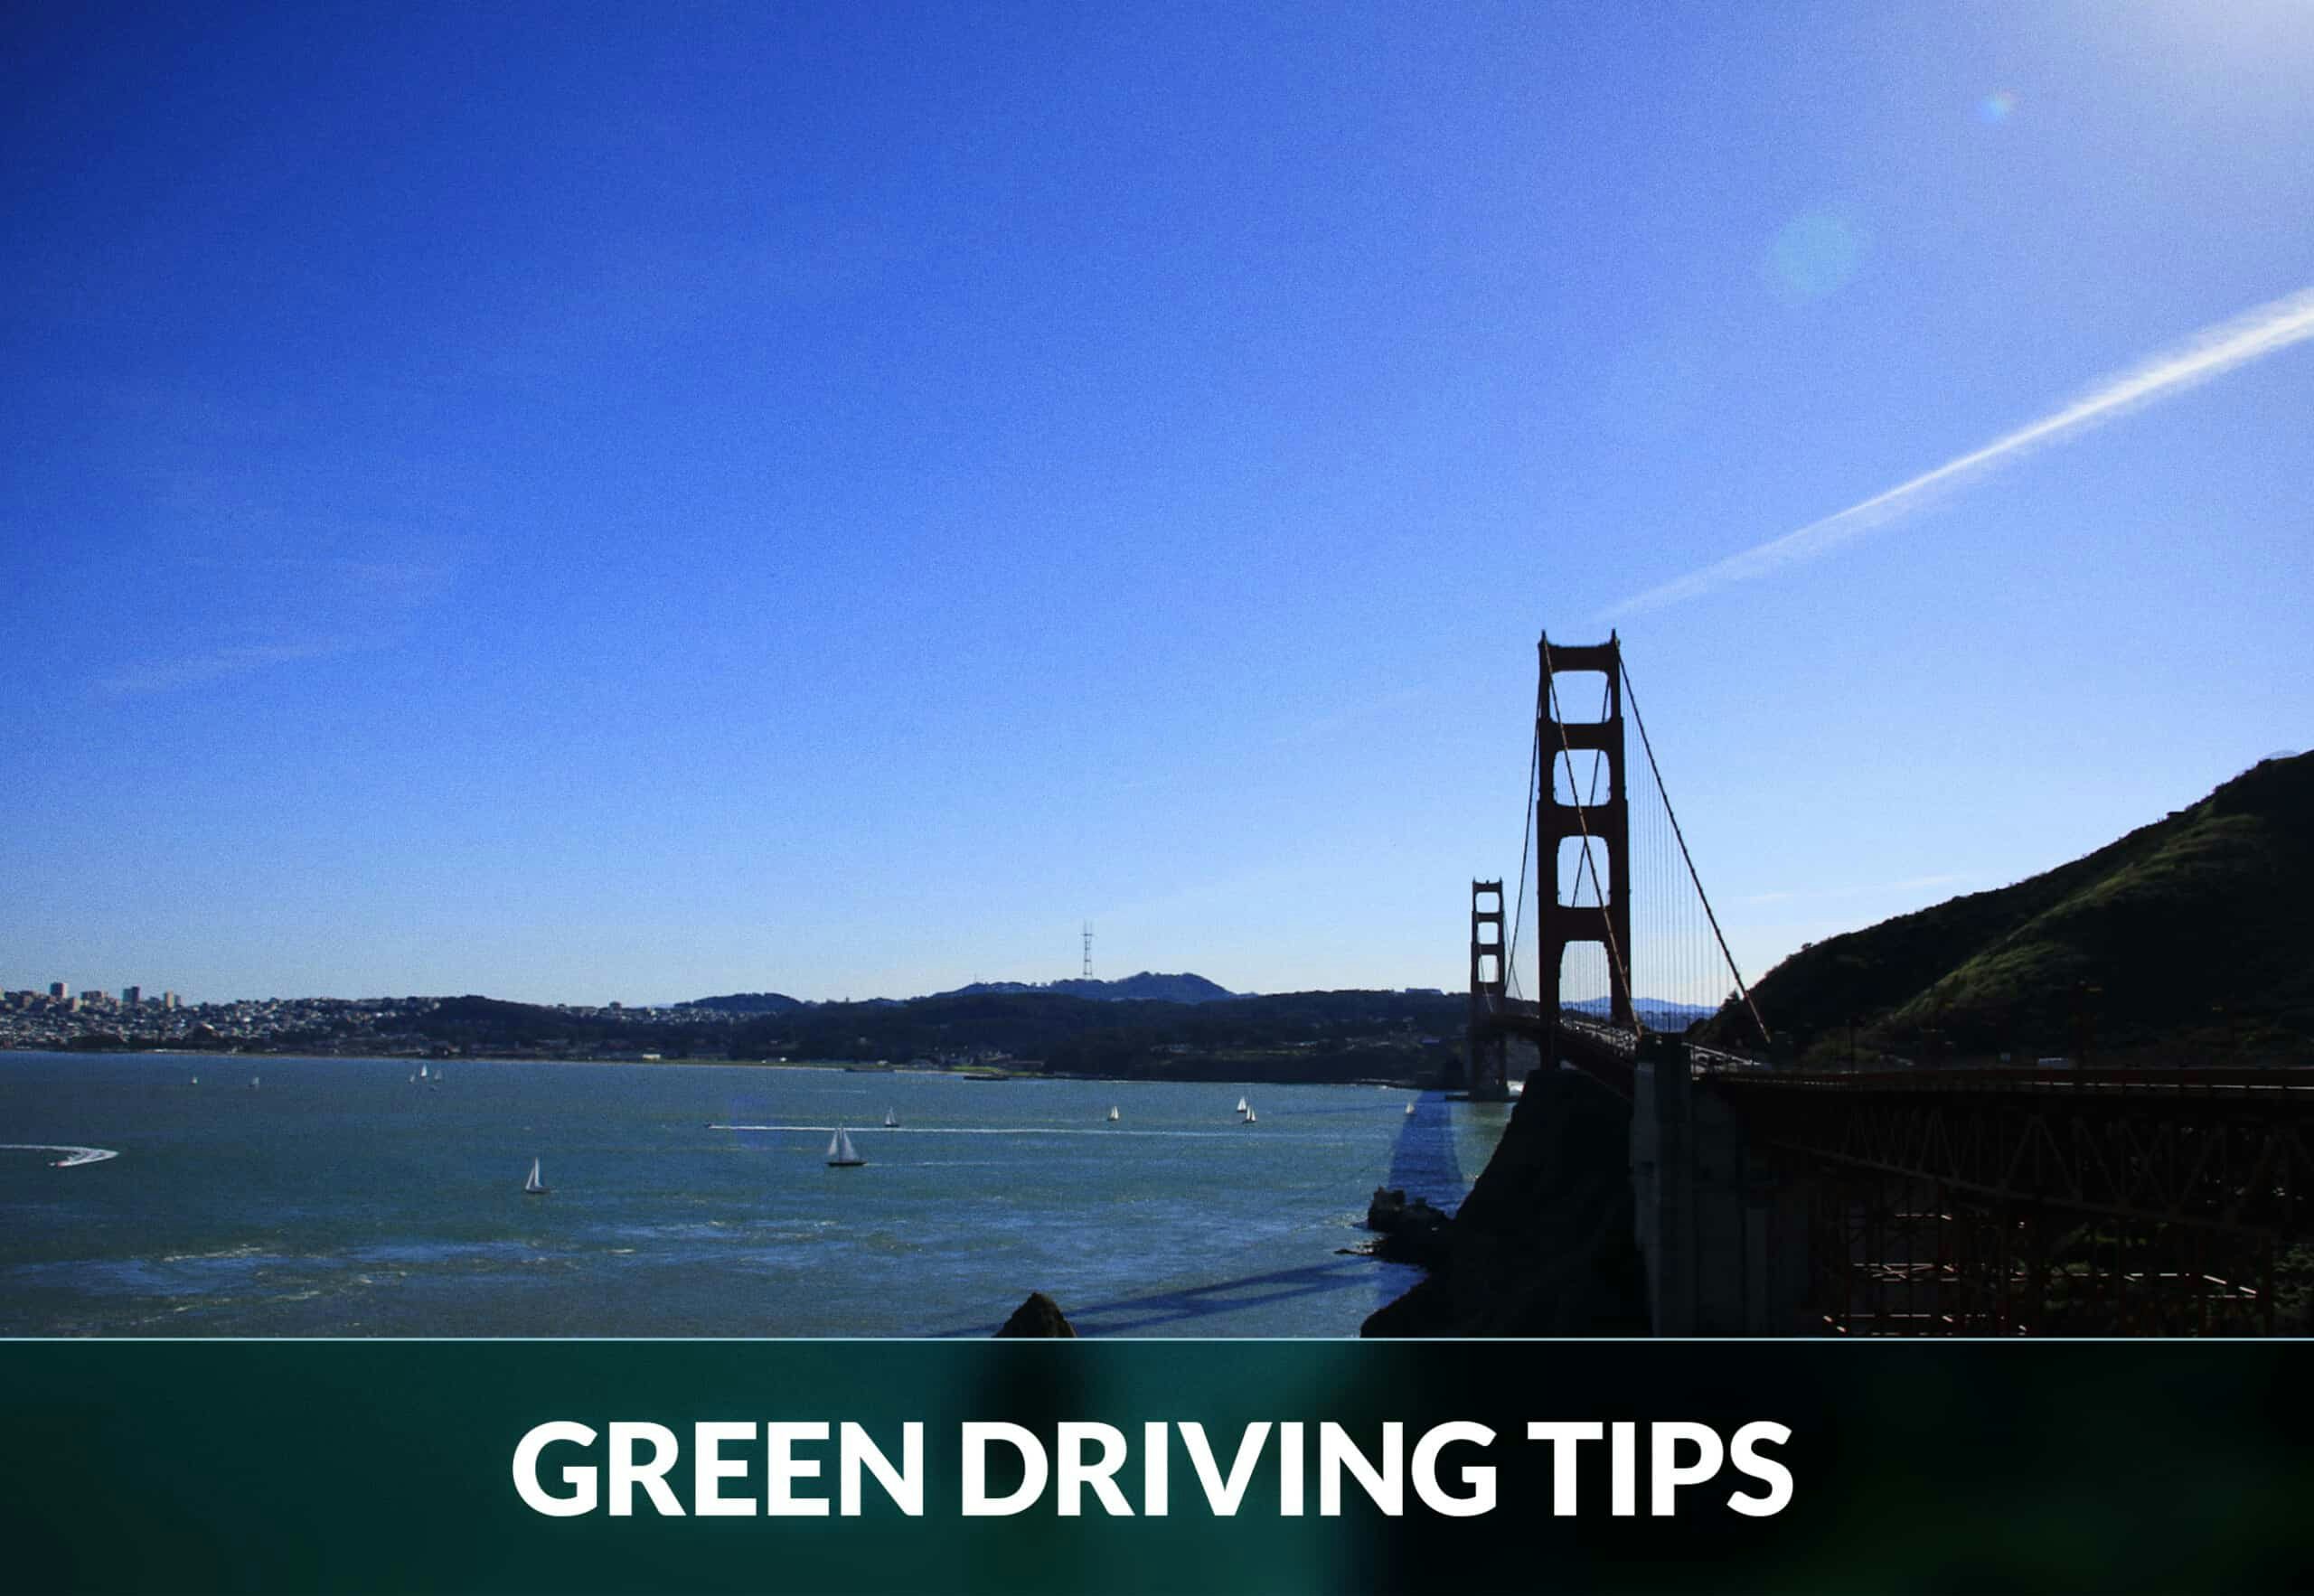 GREEN DRIVING TIPS